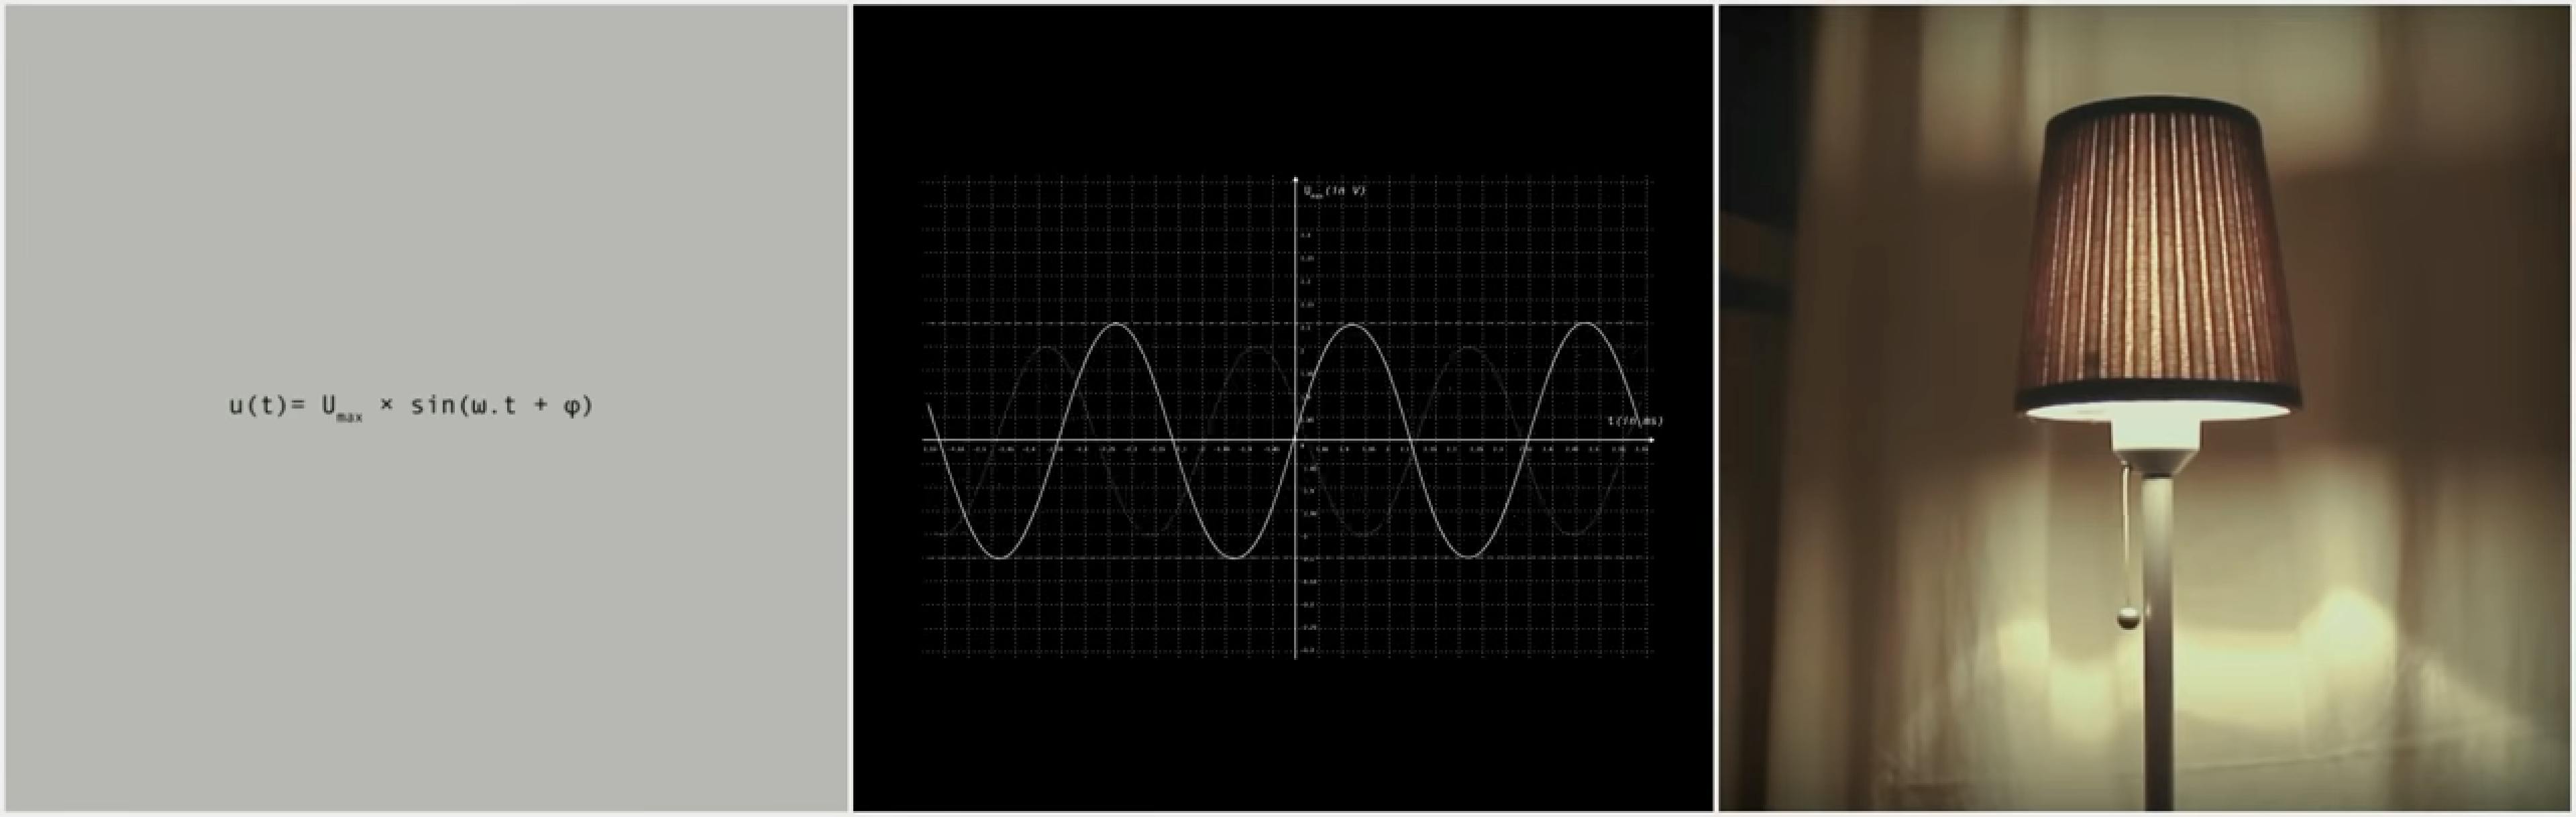 frame of the video showing a triptych math equation, its chart visualization and a lamp on